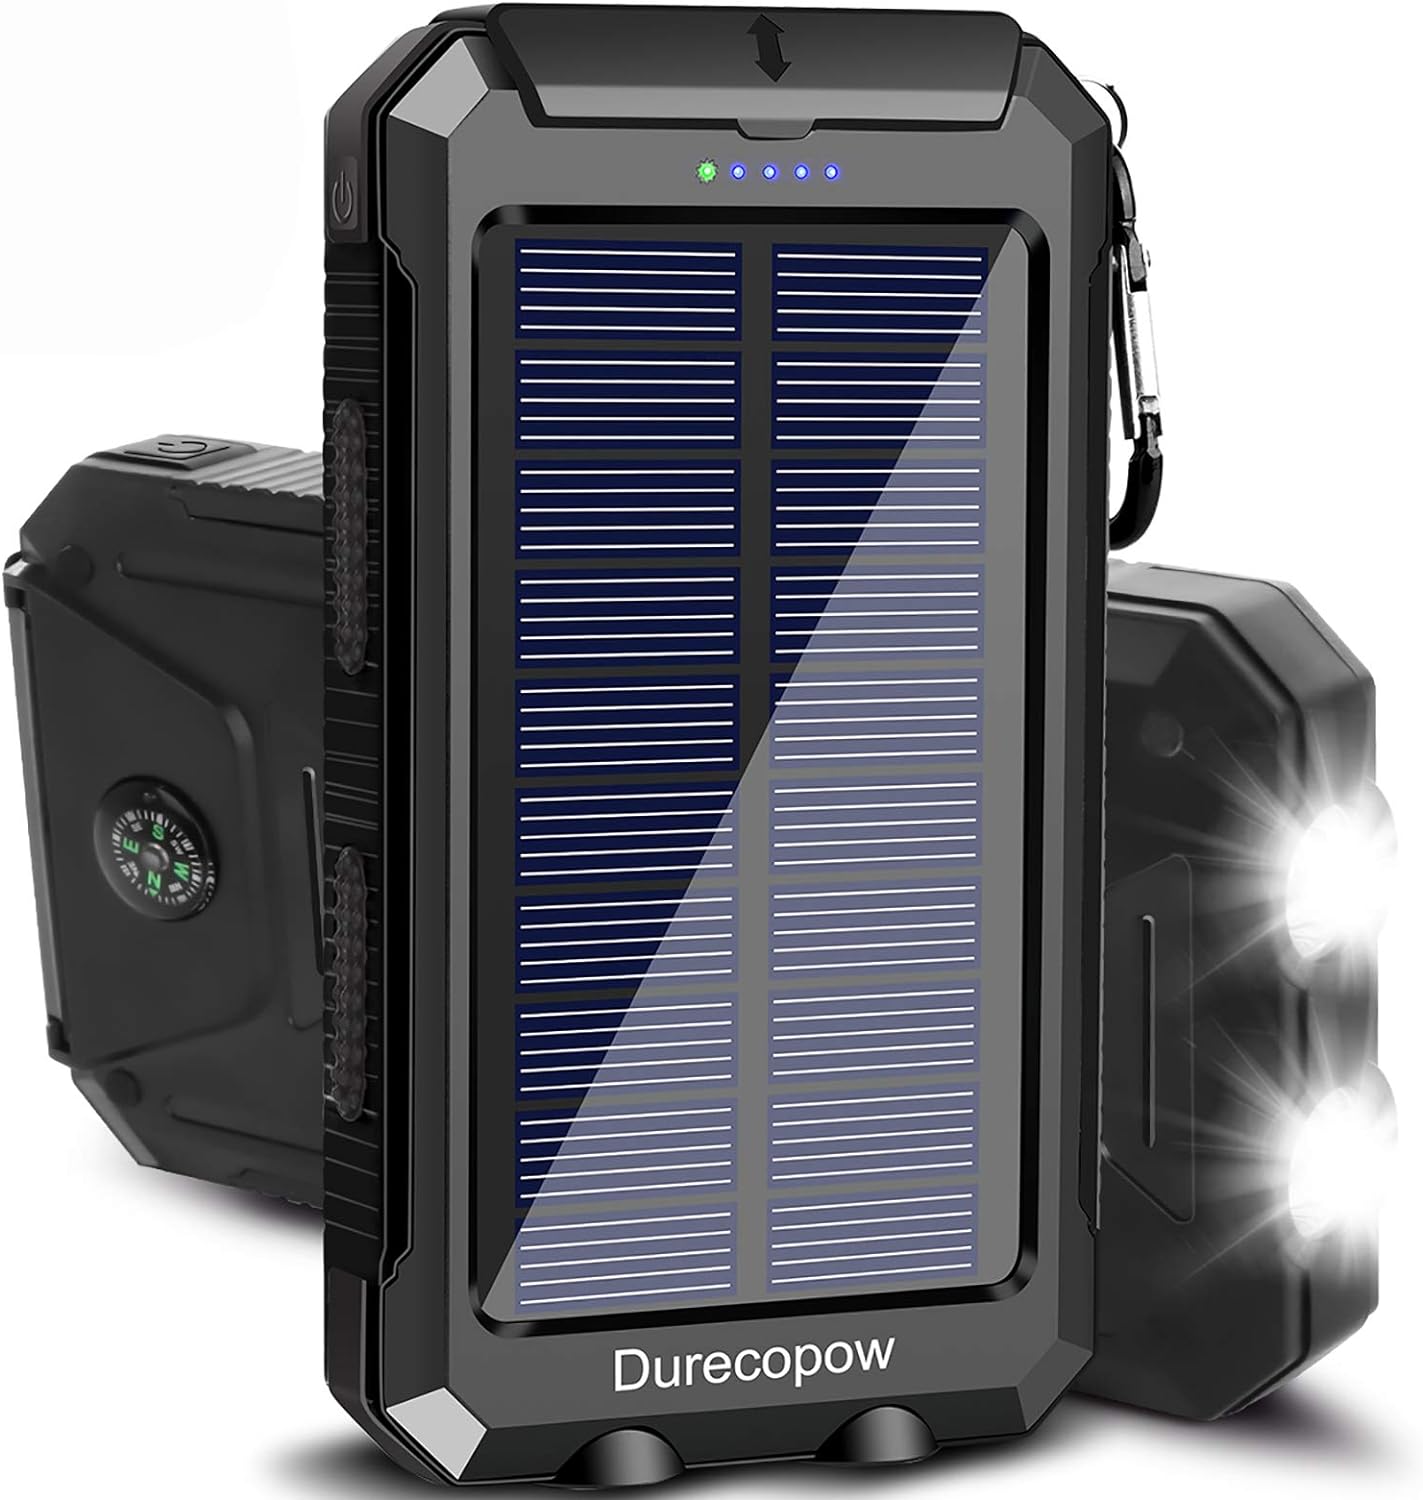 Solar mobile charger